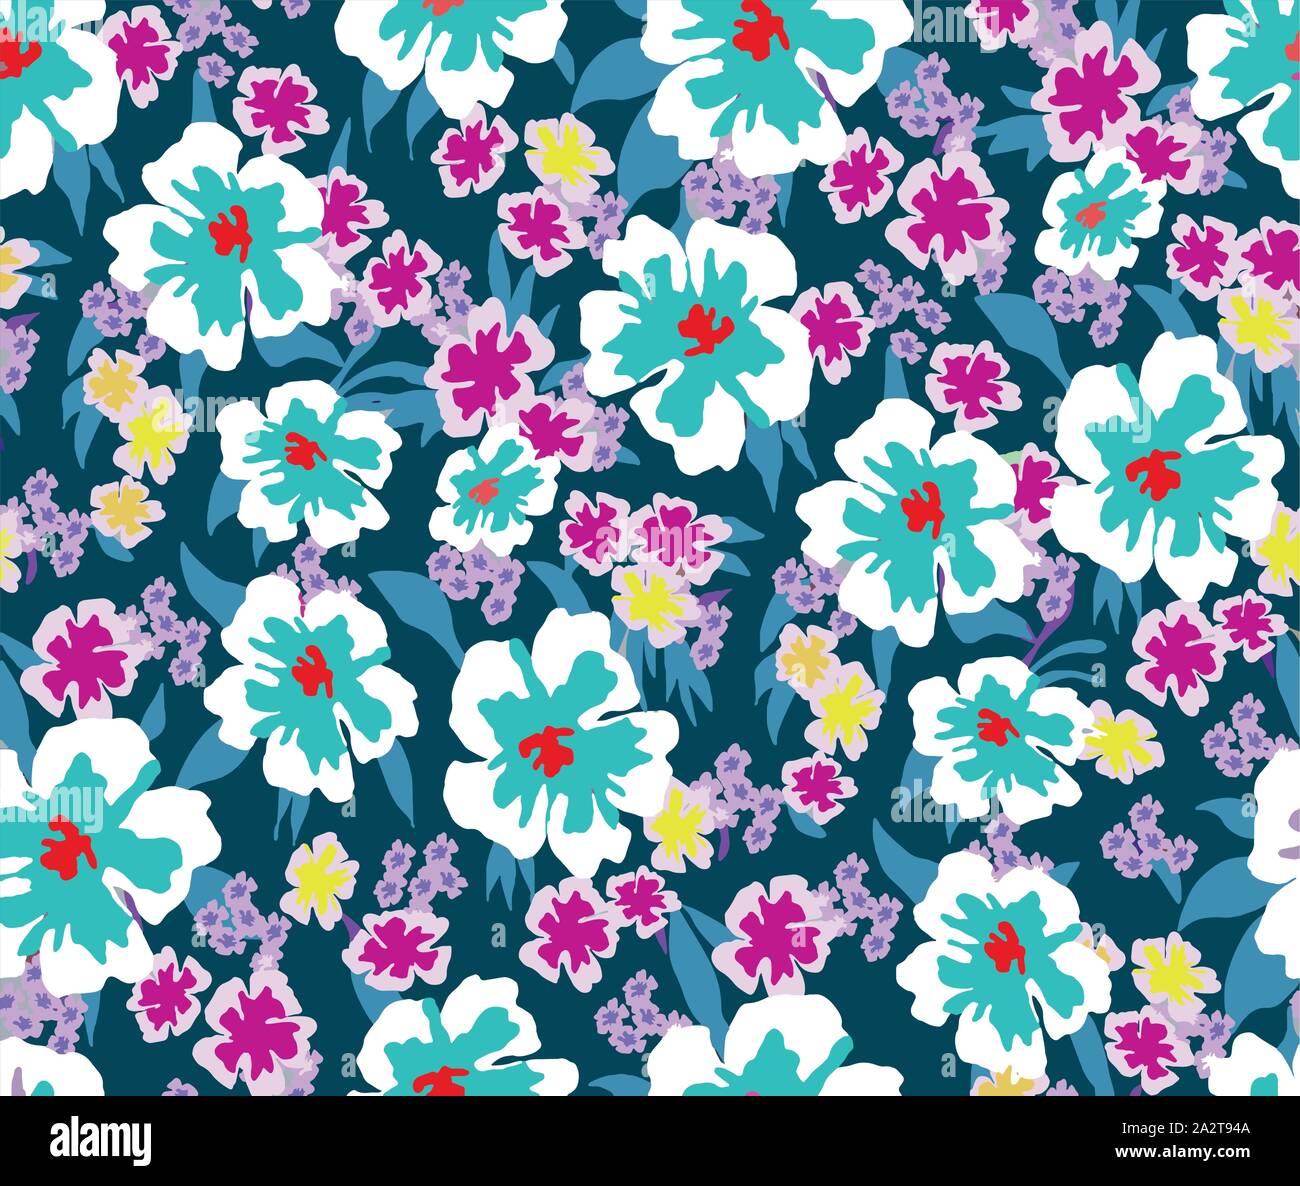 Trendy Seamless Pattern with Decorative Flowers. Repeating Design for Fabric Prints. Small Multicolor Flowers. Blue Background. Modern Floral Backgrou Stock Vector